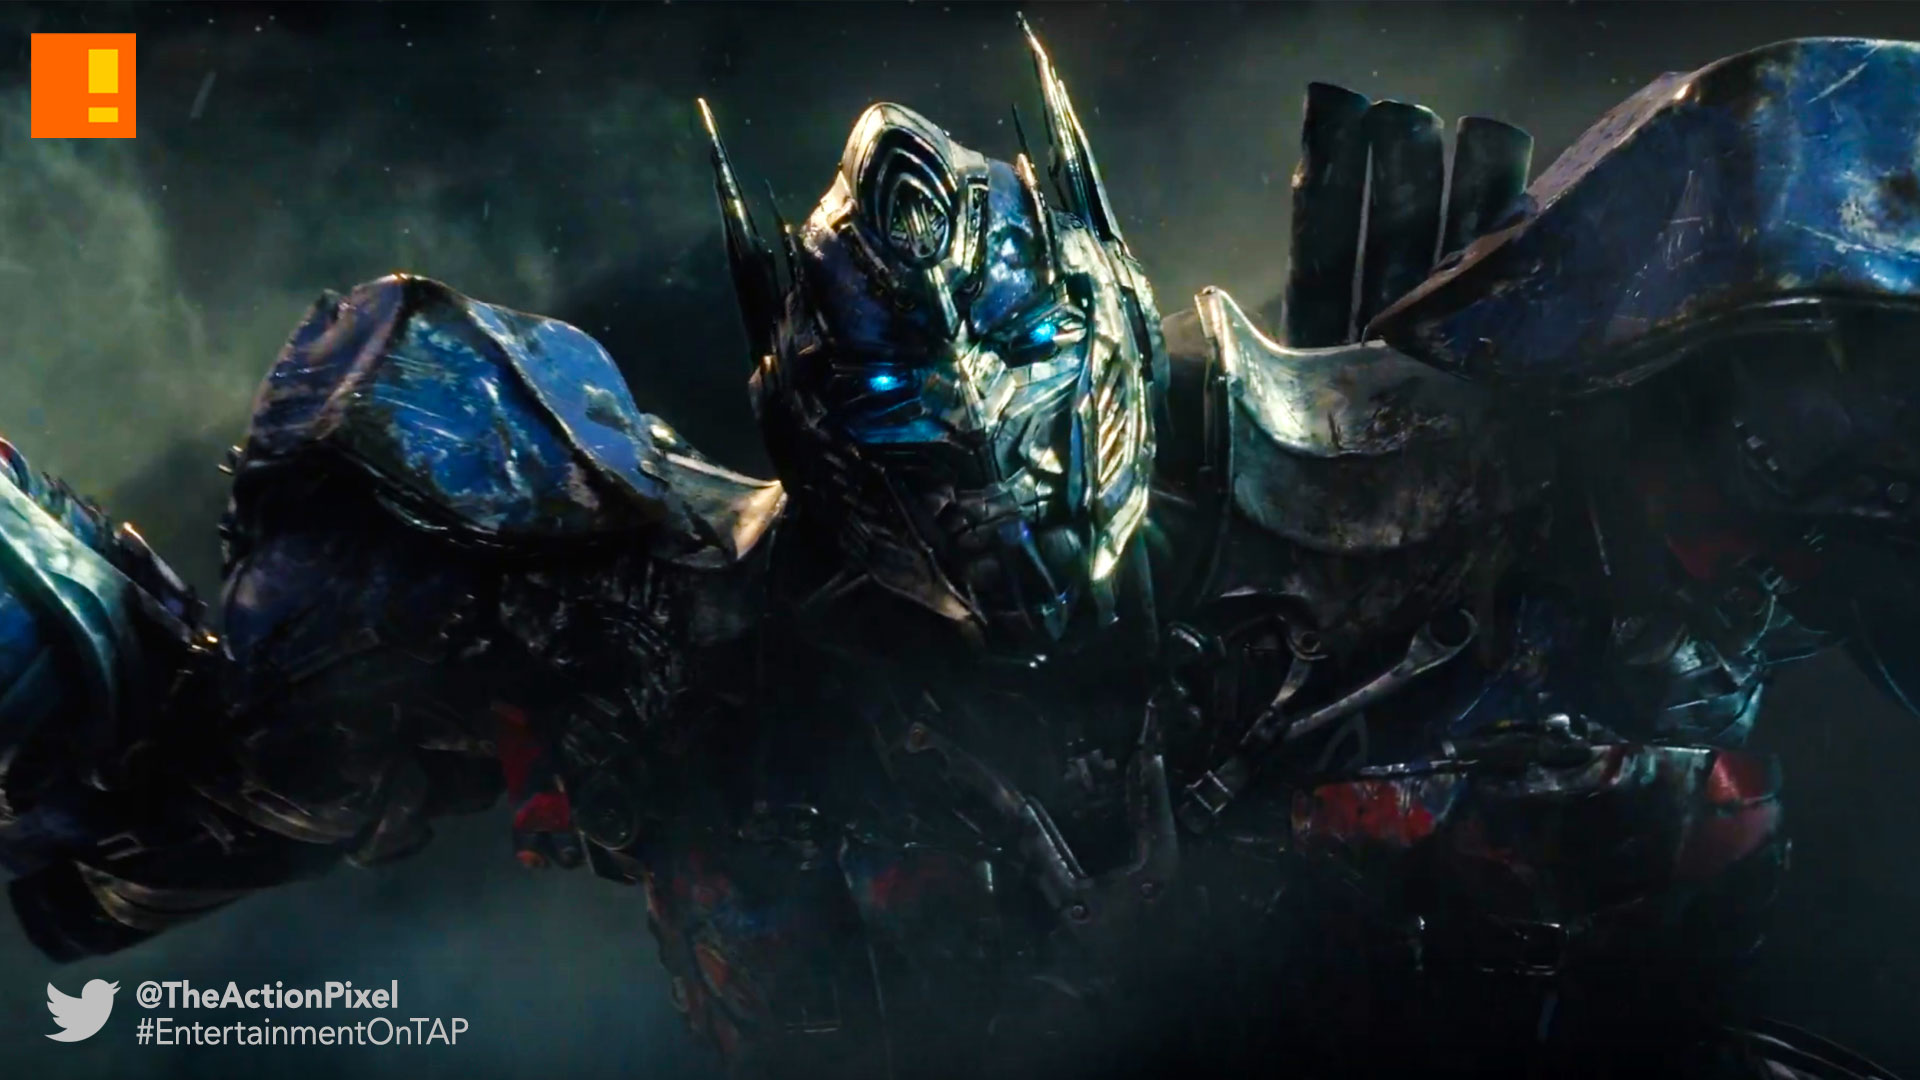 megatron, transformers, the last knight, transformers: the last knight, paramount pictures, entertainment on tap, the action pixel, omnicron, teaser, trailer, optimus prime, michael bay,